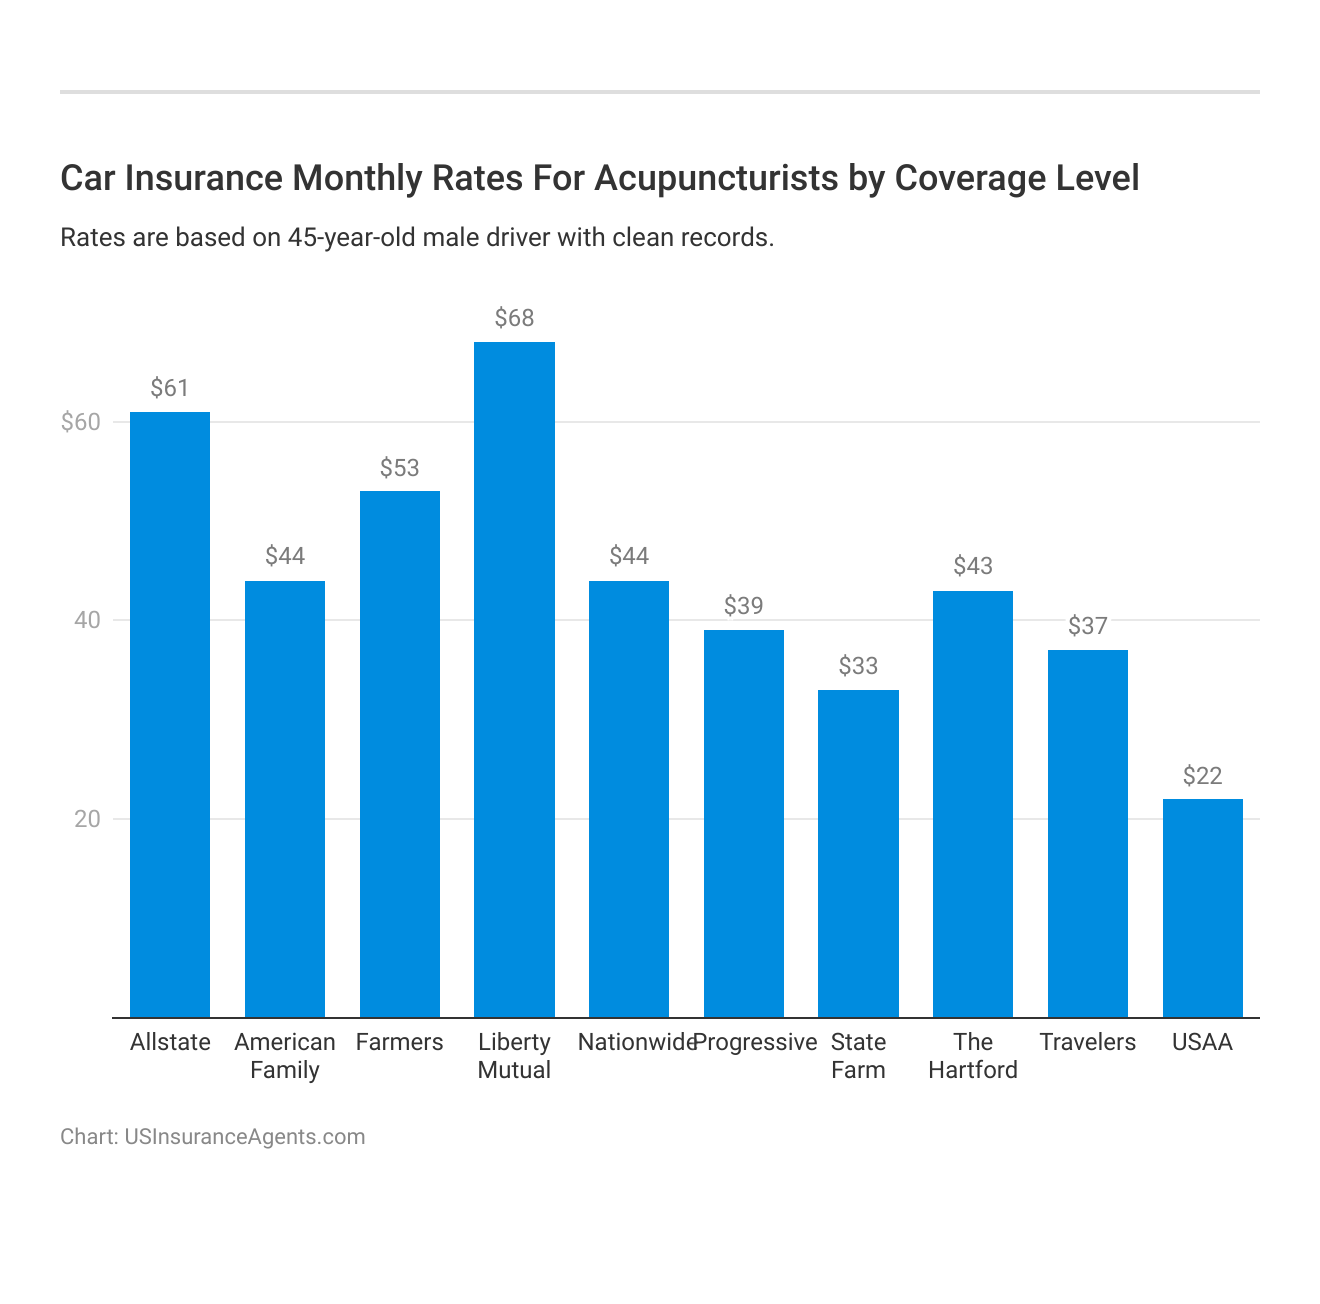 <h3>Car Insurance Monthly Rates For Acupuncturists by Coverage Level</h3>